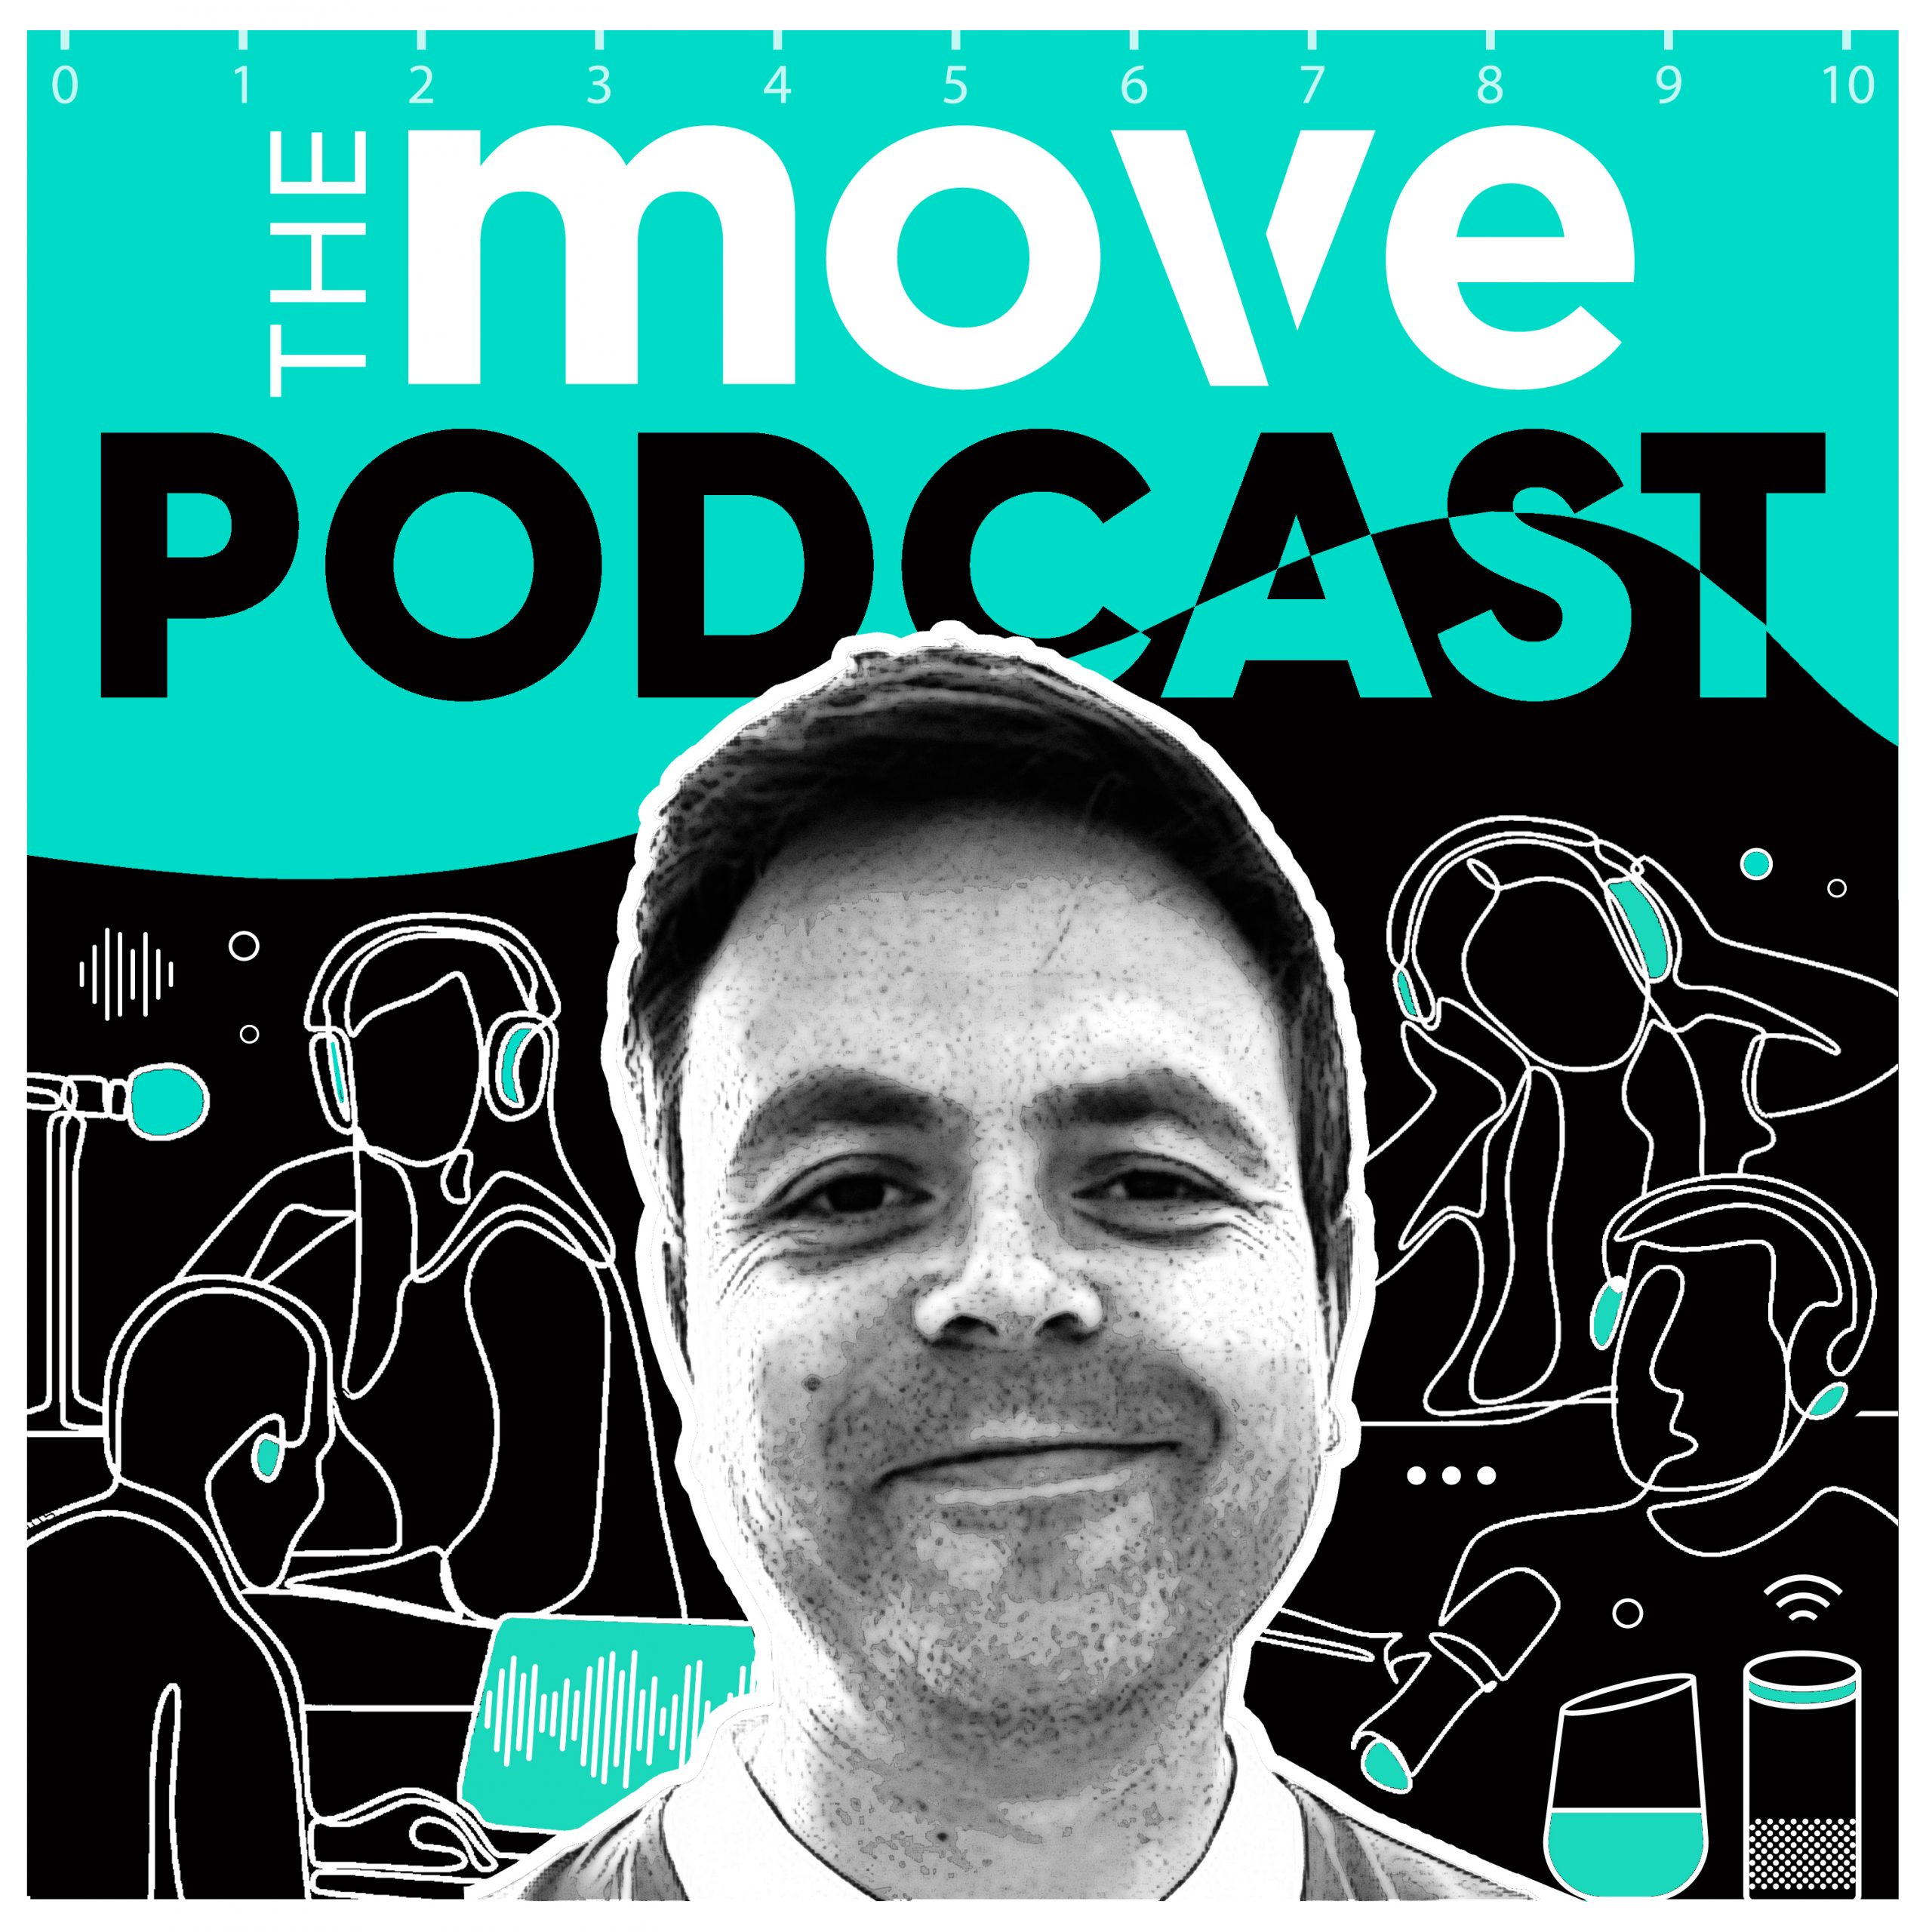 MOVEPodcast_Oct20_1